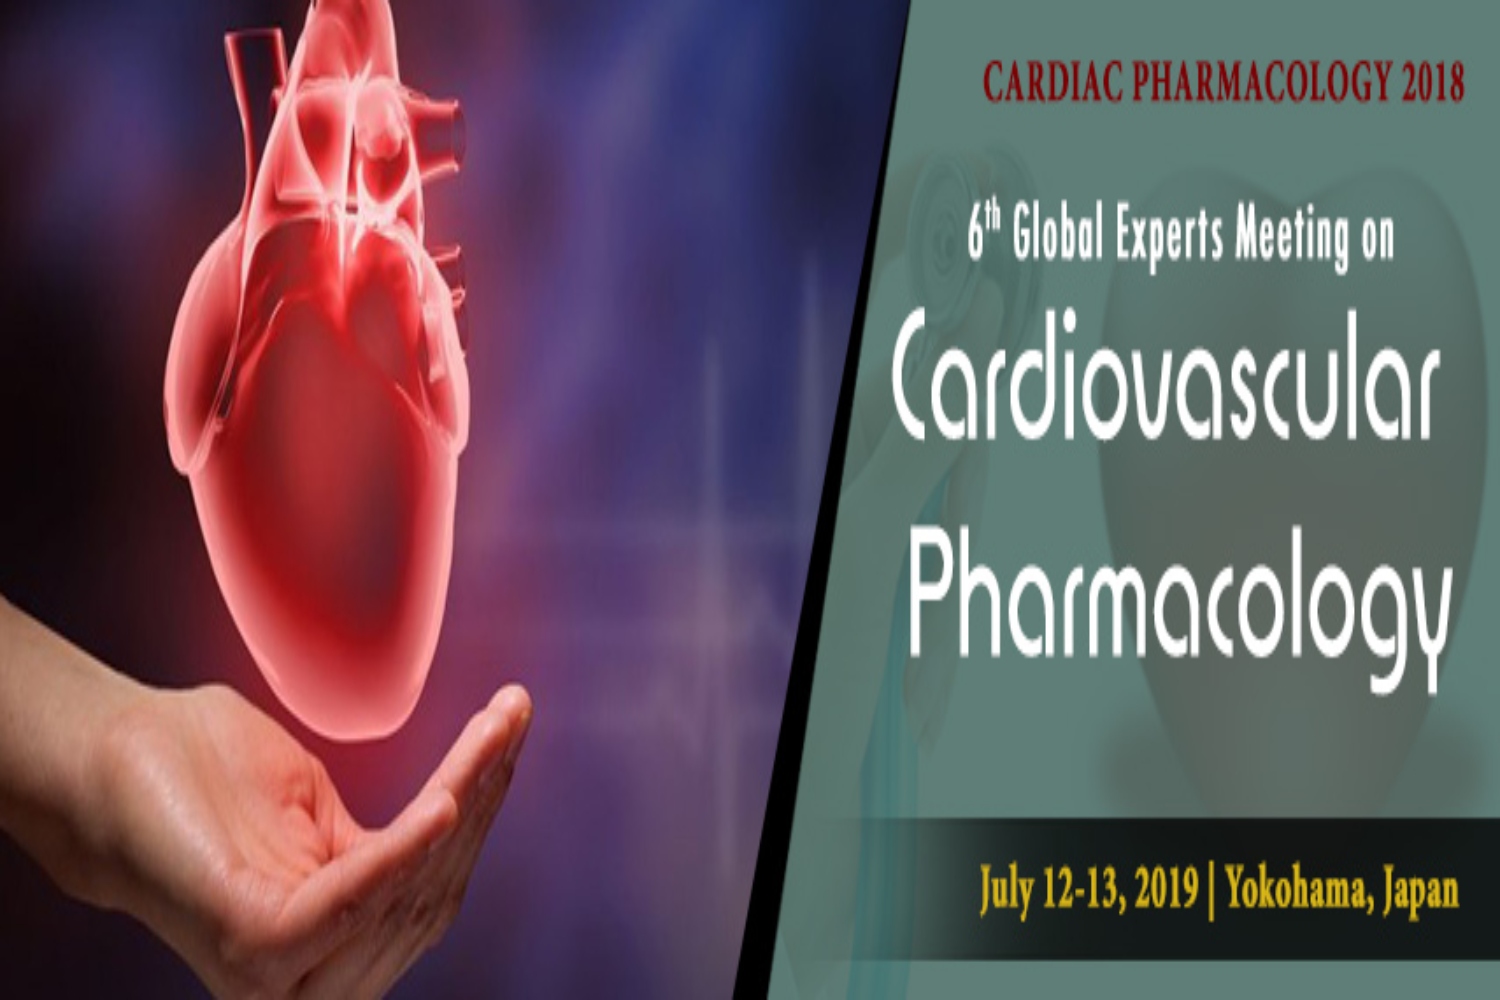 6th Global Experts Meeting on  Cardiology and Cardiac Pharmacology